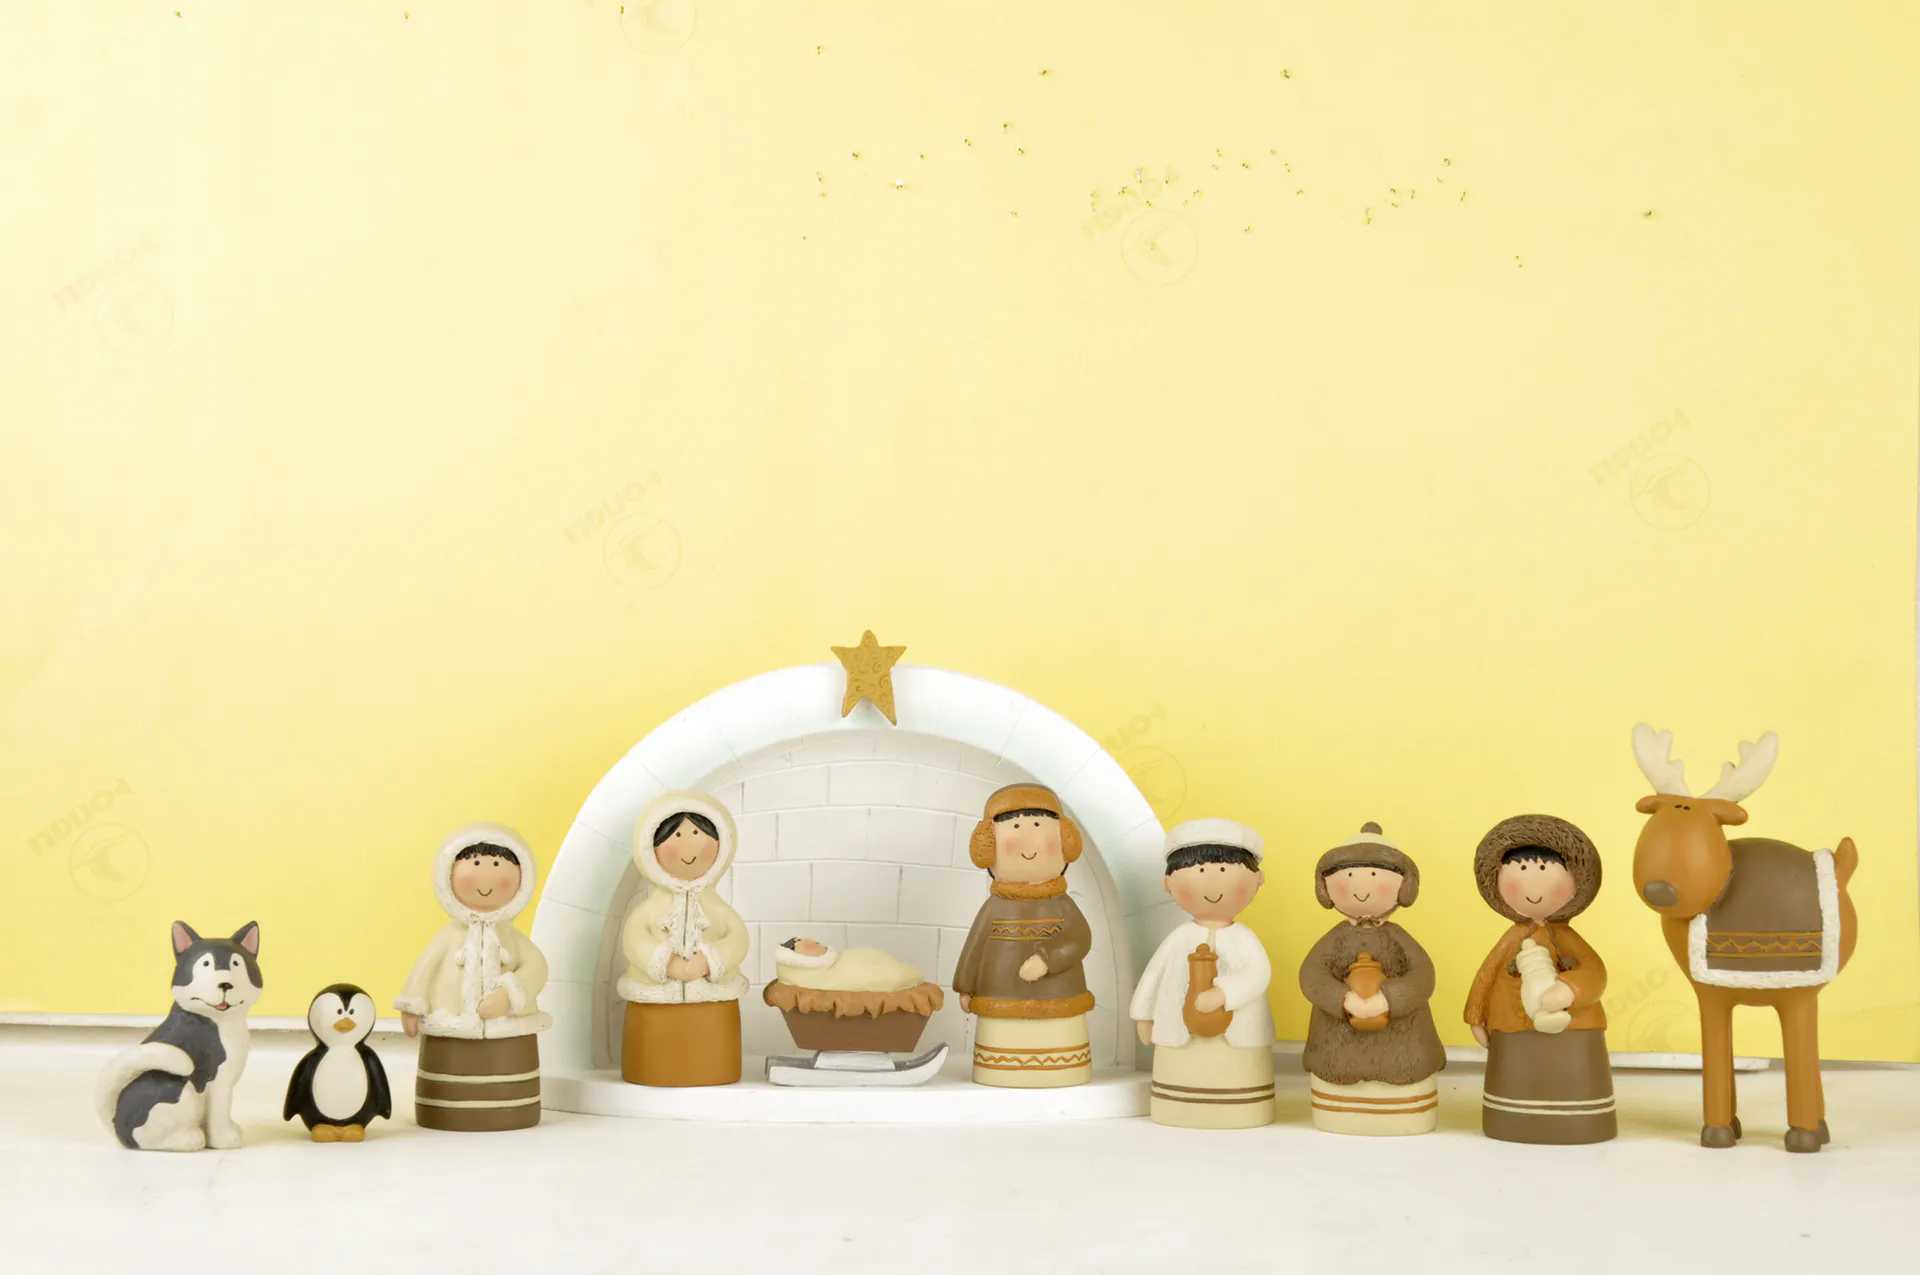 2020 hot-selling resin religious nativity figurines set of 11